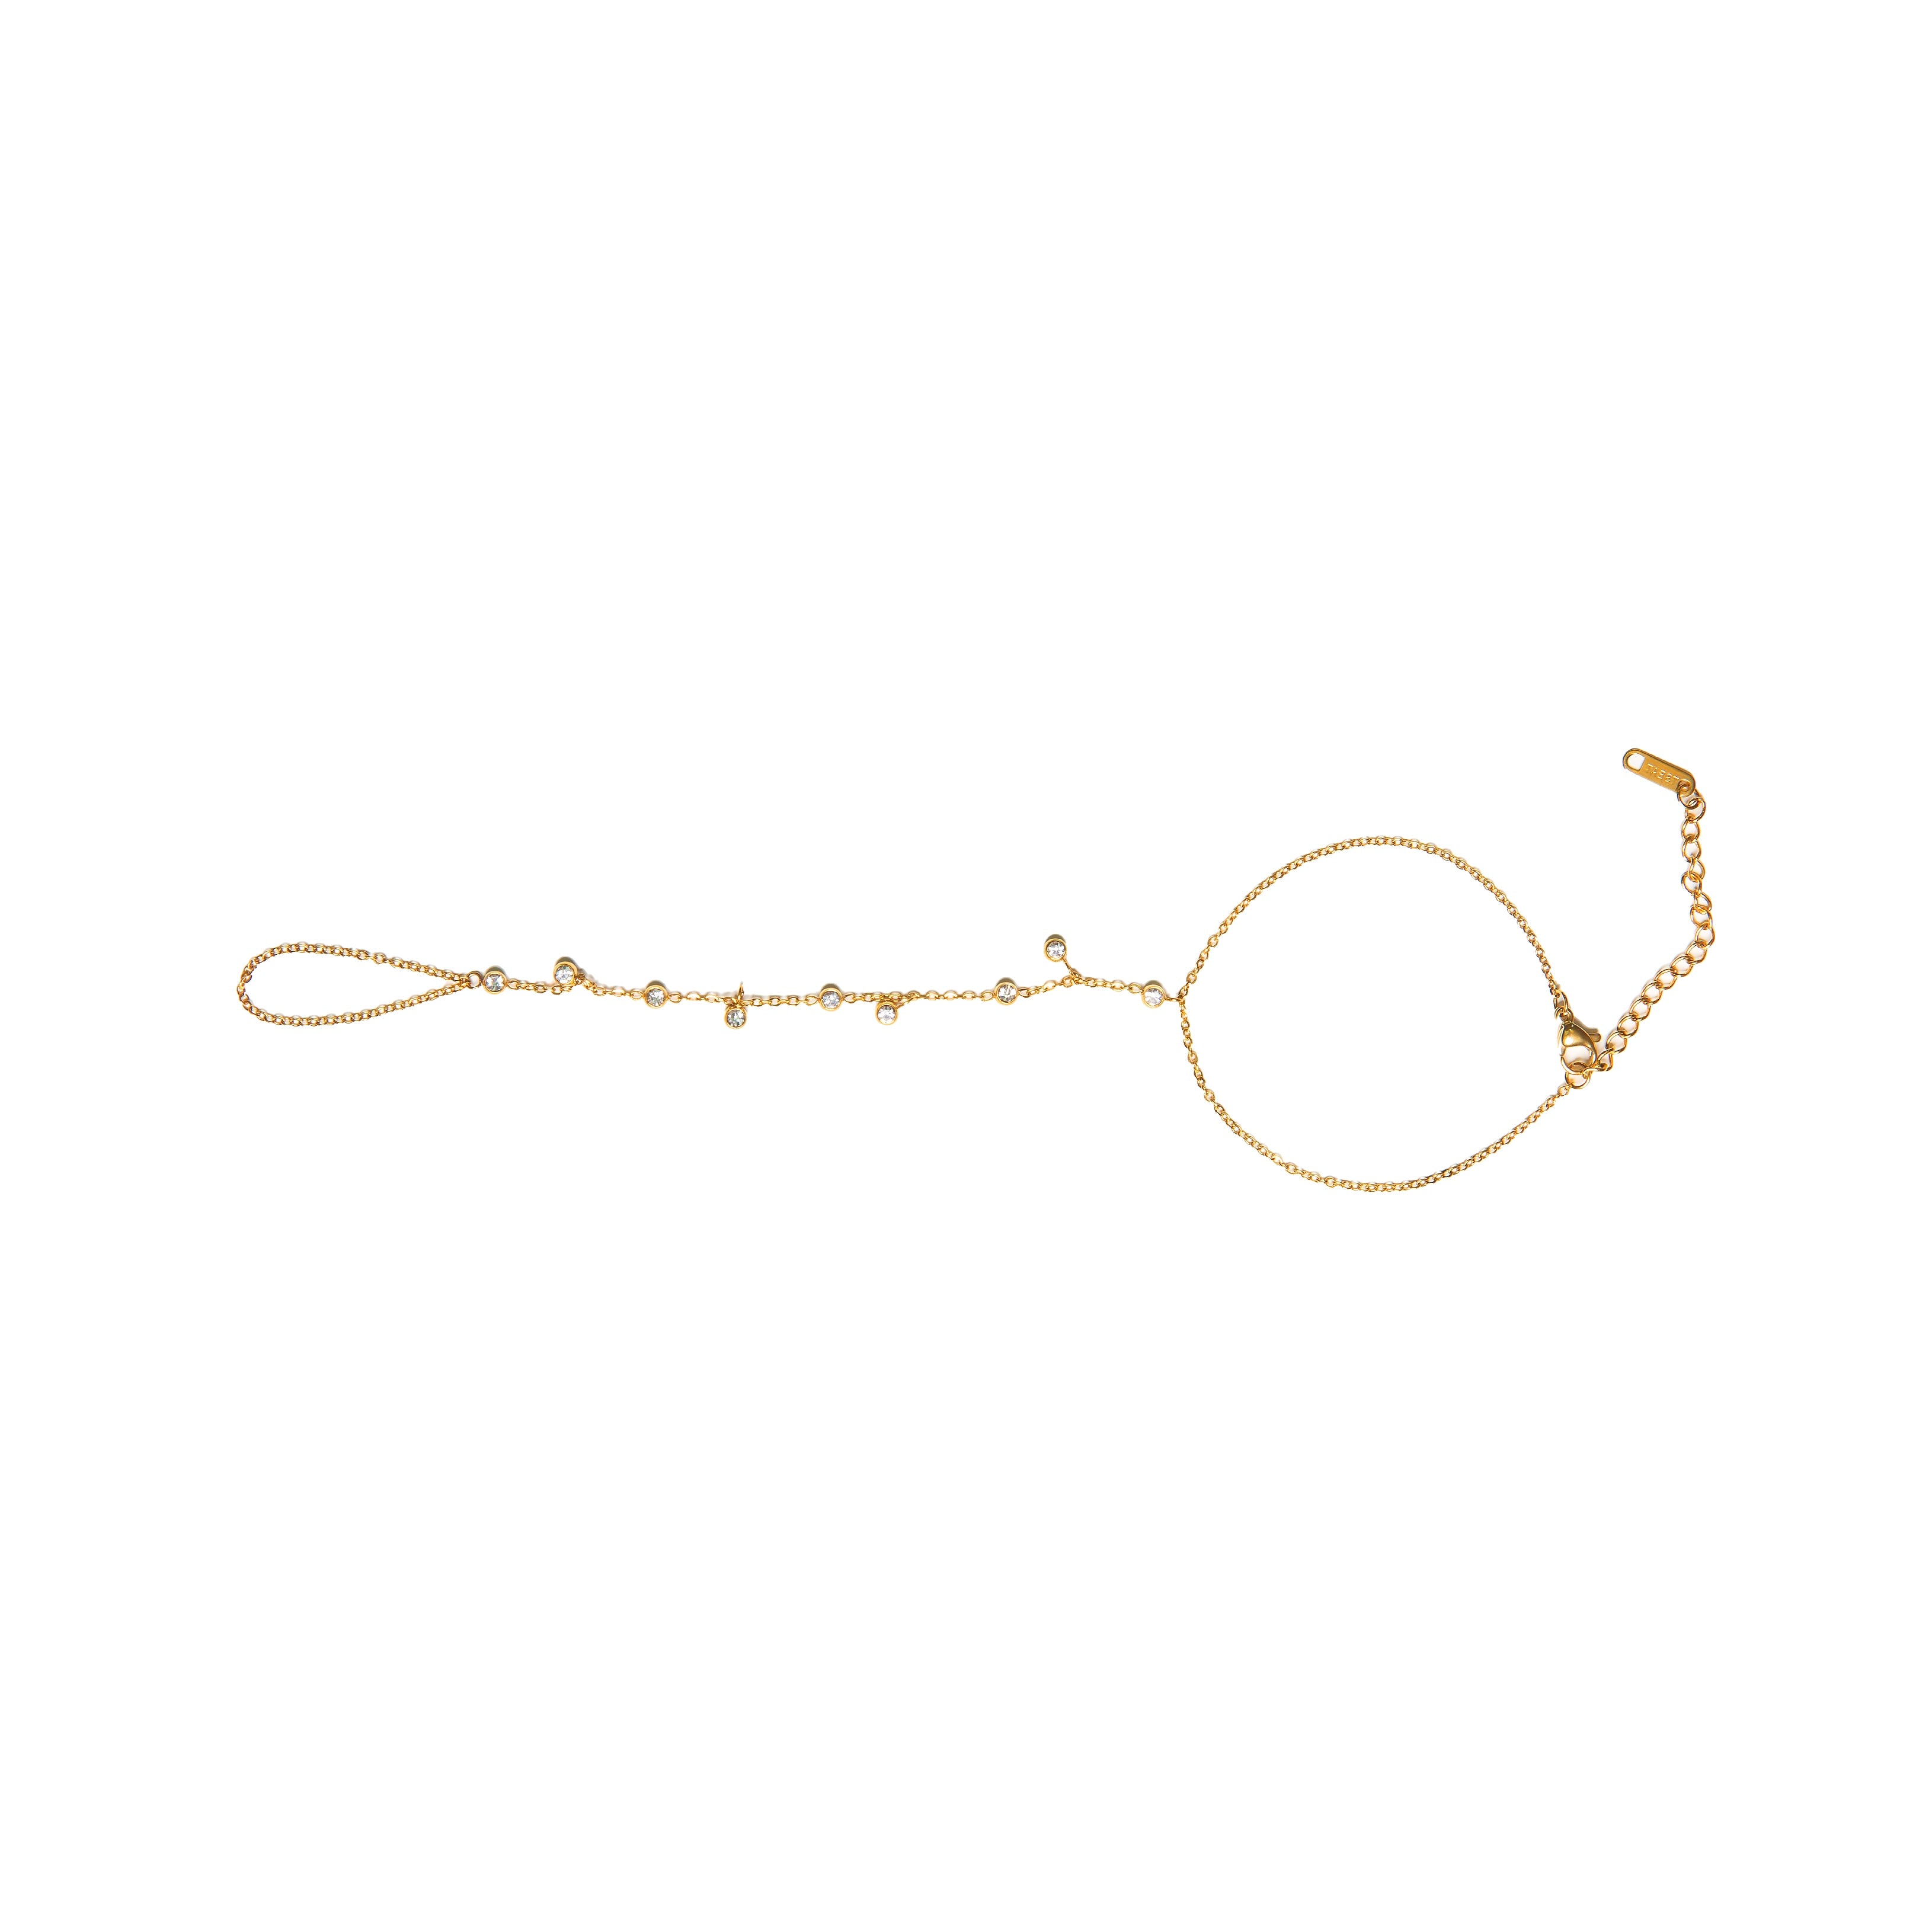 A lovely hand chain that is perfect for special occasions to bring a touch of royalty to your hands.  18K gold plated on stainless steel. Length: 7" Extender: 2" One size fits most